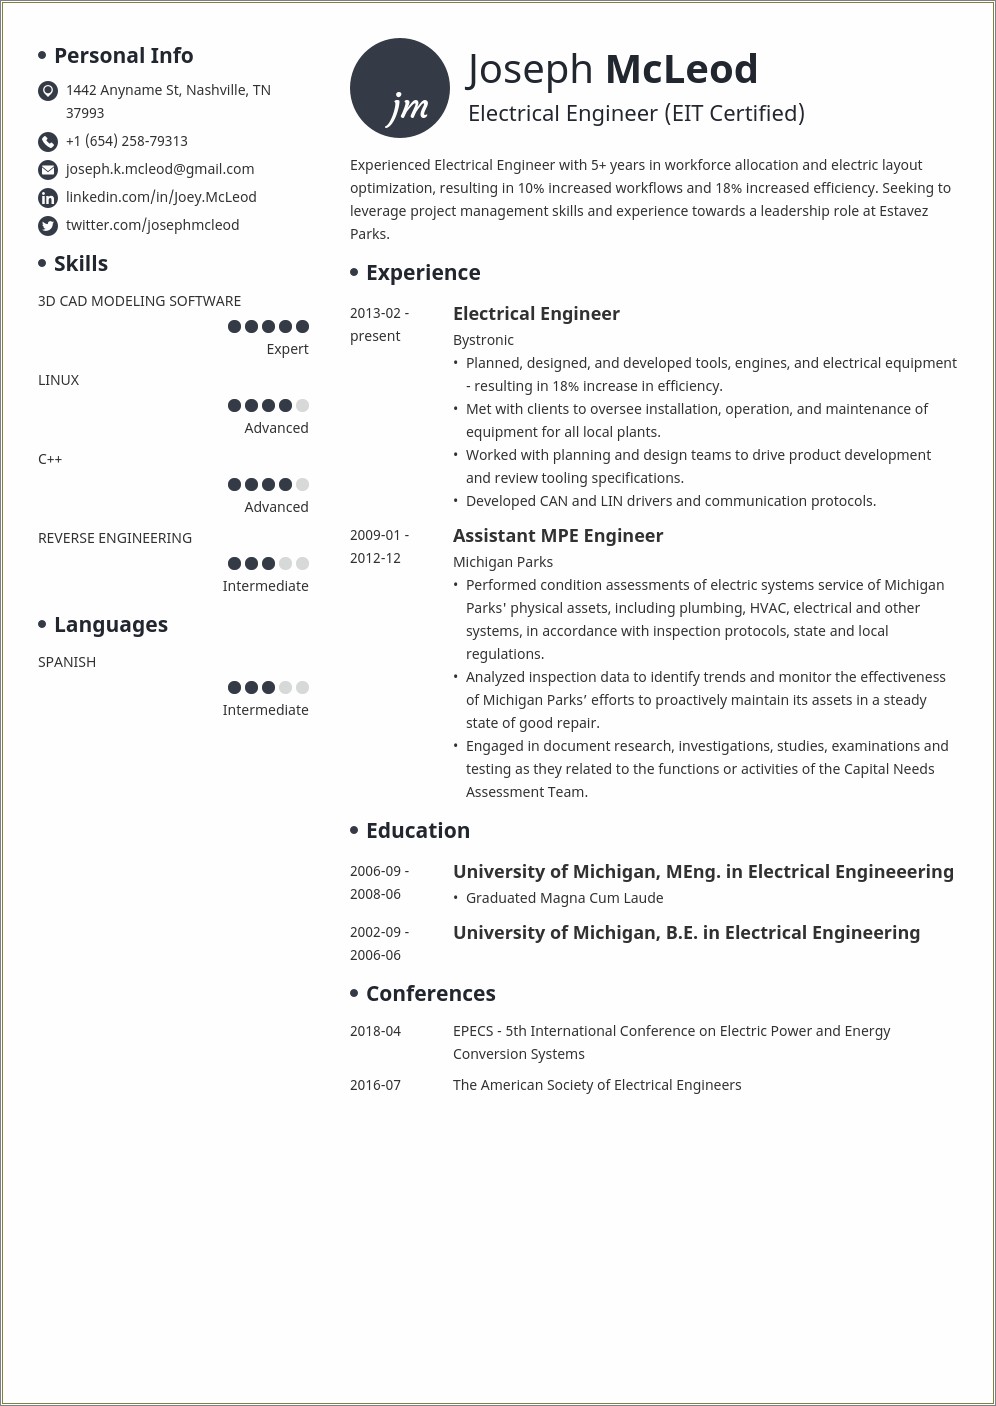 Resume Objective To Work With A Power Company